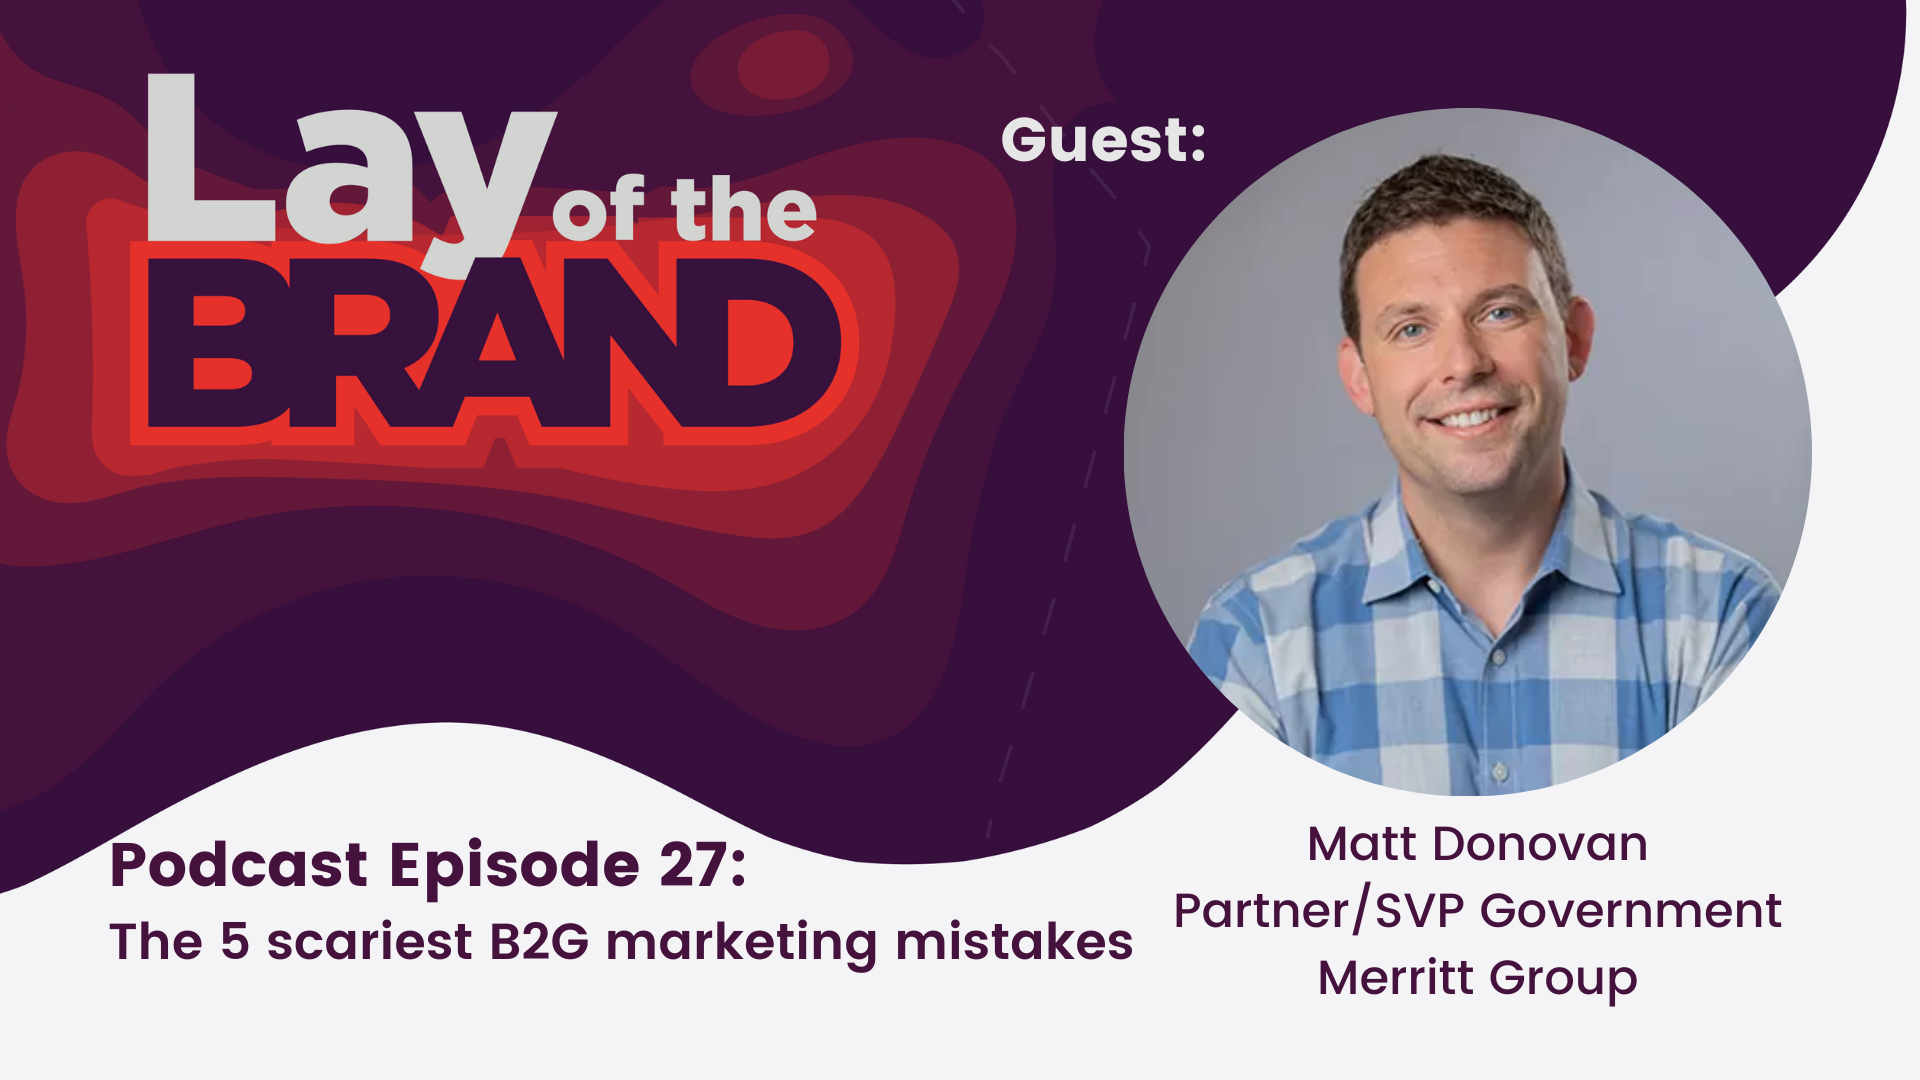 Lay of the Brand episode 27 - The 5 Scariest B2G Marketing Mistakes